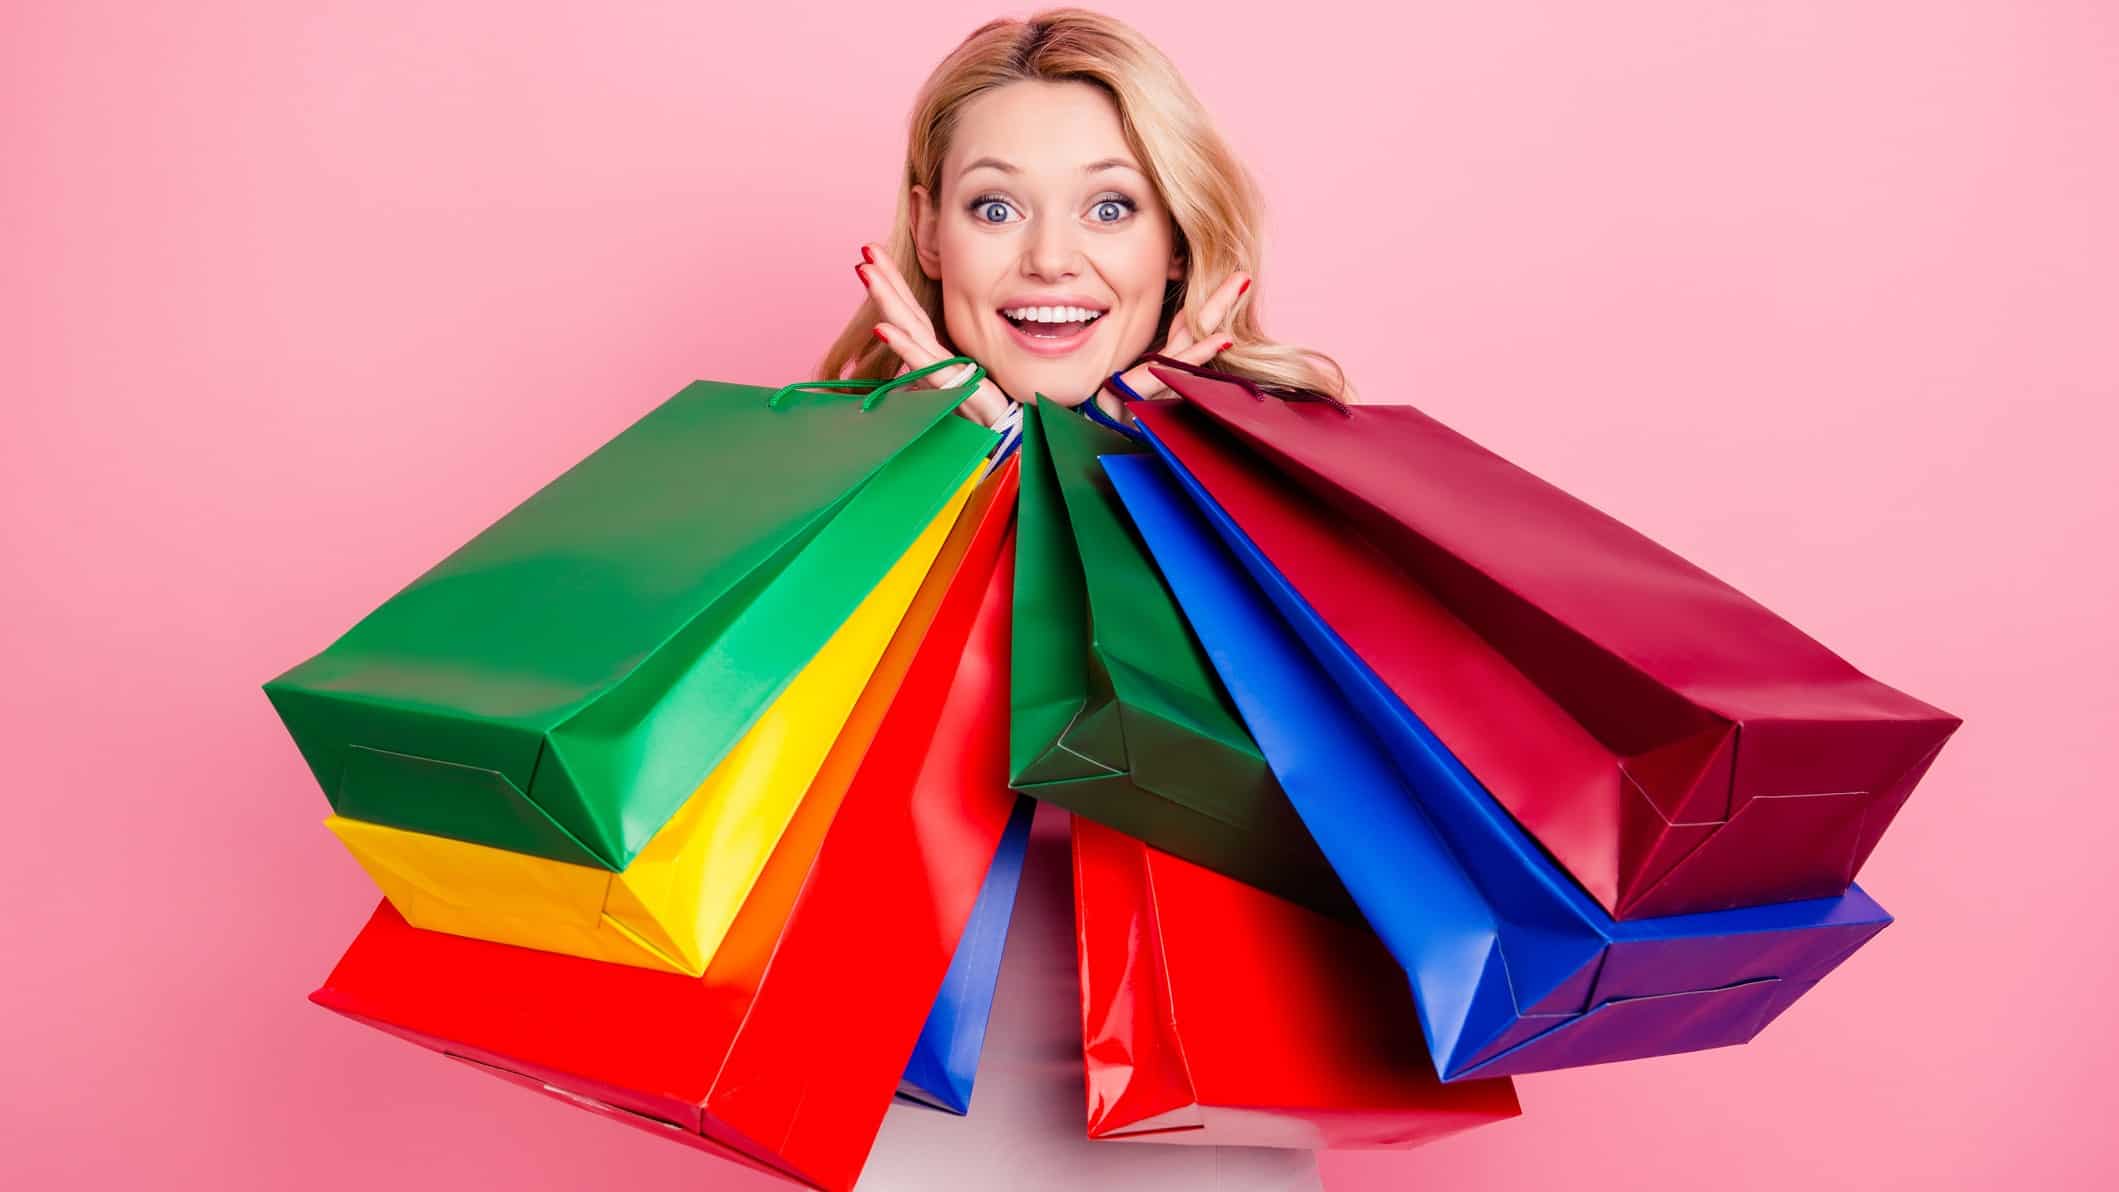 ASX 200 retail shares a woman smiles over the top of multiple shopping bags she is holding in both hands up near her face.